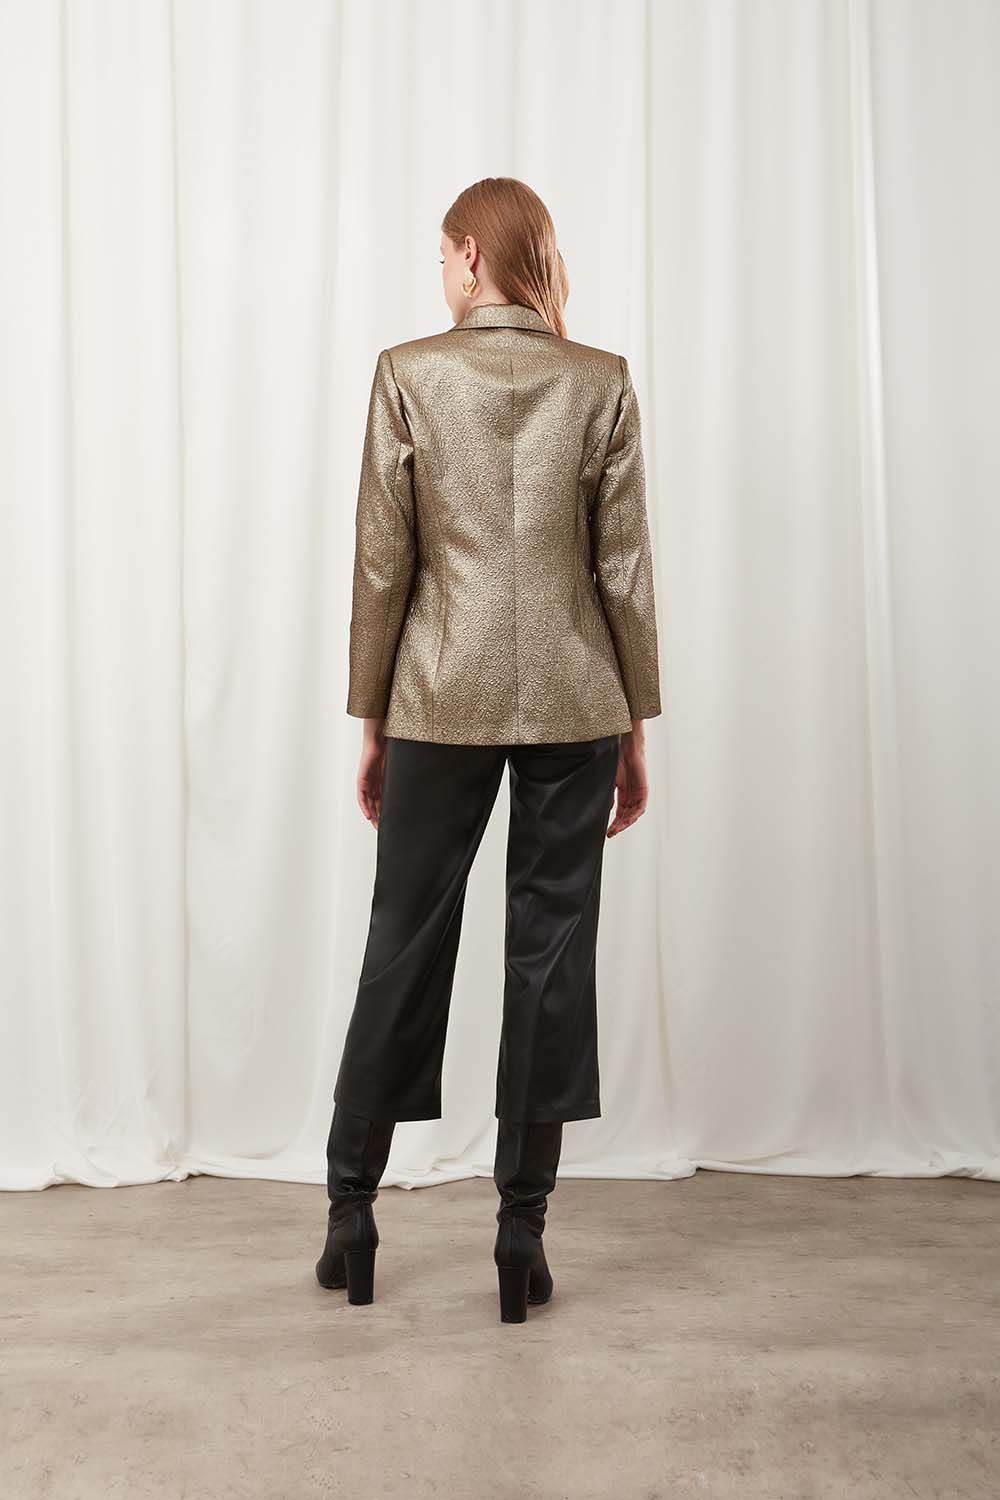 Belted Gold Jacket with Jacquard